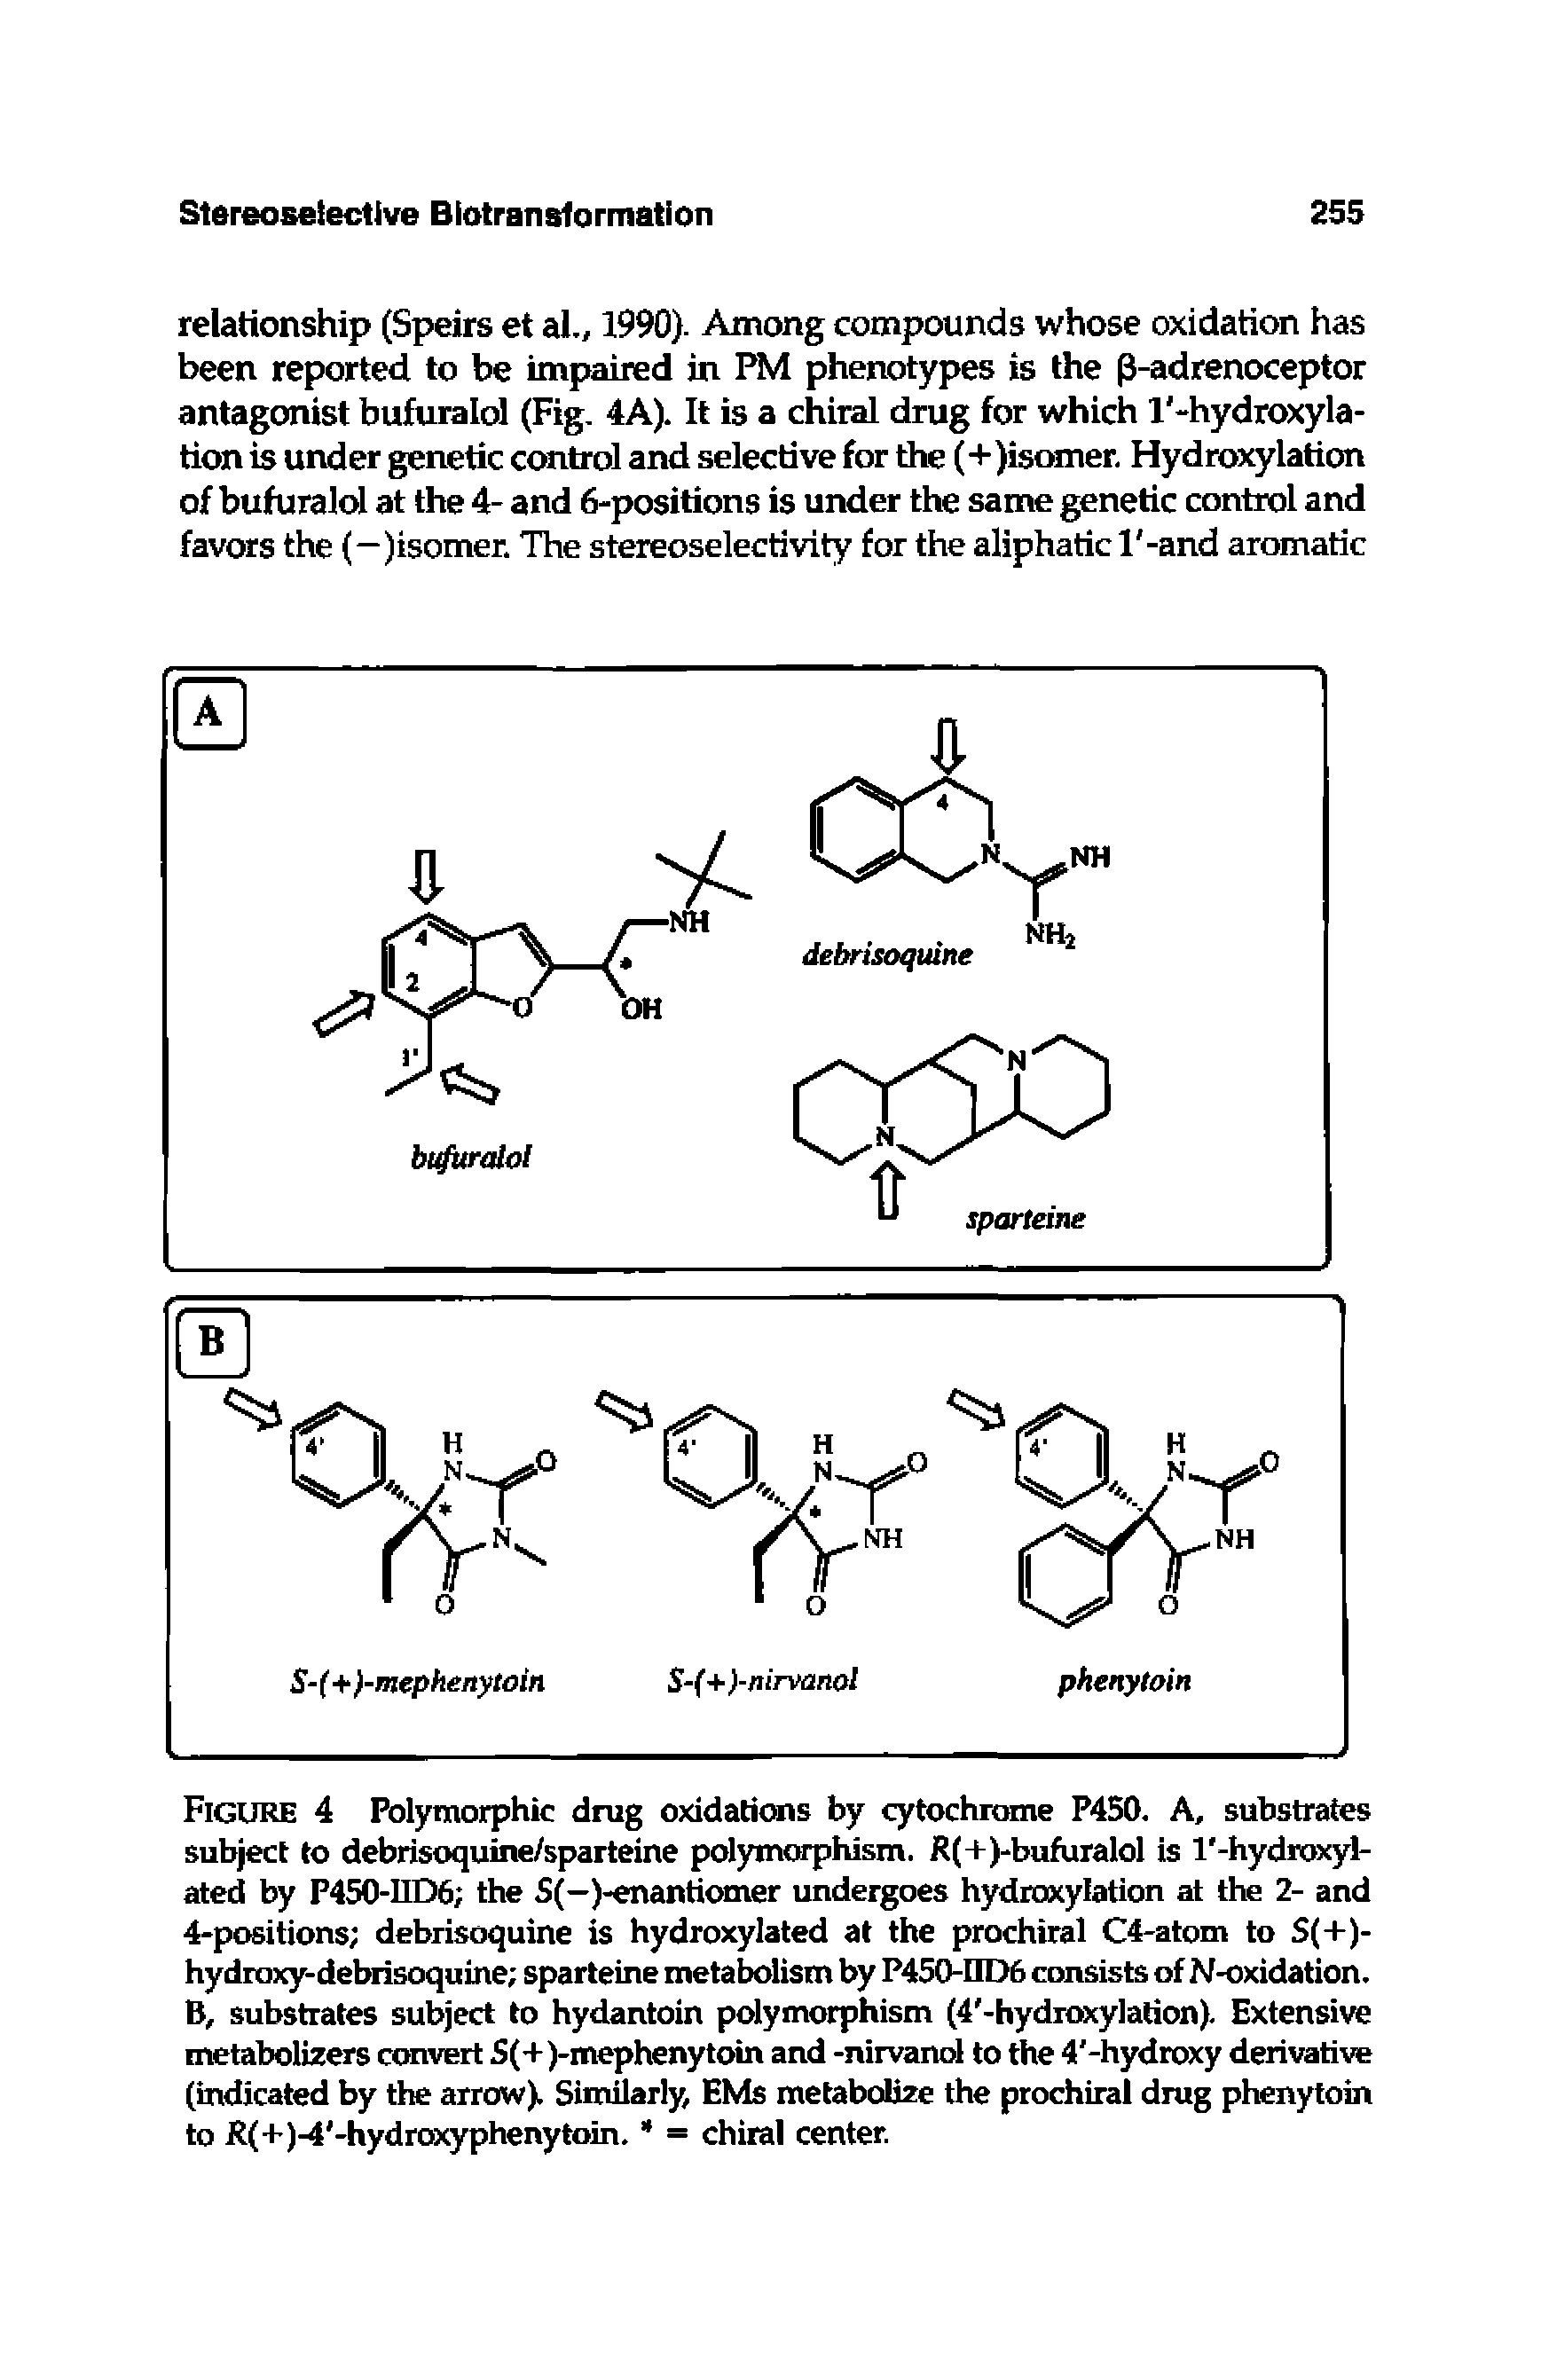 Figure 4 Polymorphic drug oxidations by cytochrome P450. A, substrates subject to debrisoquine/sparteine polymorphism. R(+)-bufuralol is I -hydroxyl-ated by P450-IID6 the S(—)-enantiomer undergoes hydroxylation at the 2- and 4-positions debrisoquine is hydroxylated at the prochiral C4-atom to S(+)-hydroxy-debrisoquine sparteine metabolism by P450-IID6 consists of N-oxidation. B, substrates subject to hydantoin polymorphism (4 -hydroxylation). Extensive metabolizers convert S(+)-mephenytoin and -nirvanol to the 4 -hydroxy derivative (indicated by the arrow). Similarly, EMs metabolize the prochiral drug phenytoin to R(+)-4 -hydroxyphenytoin. = chiral center.